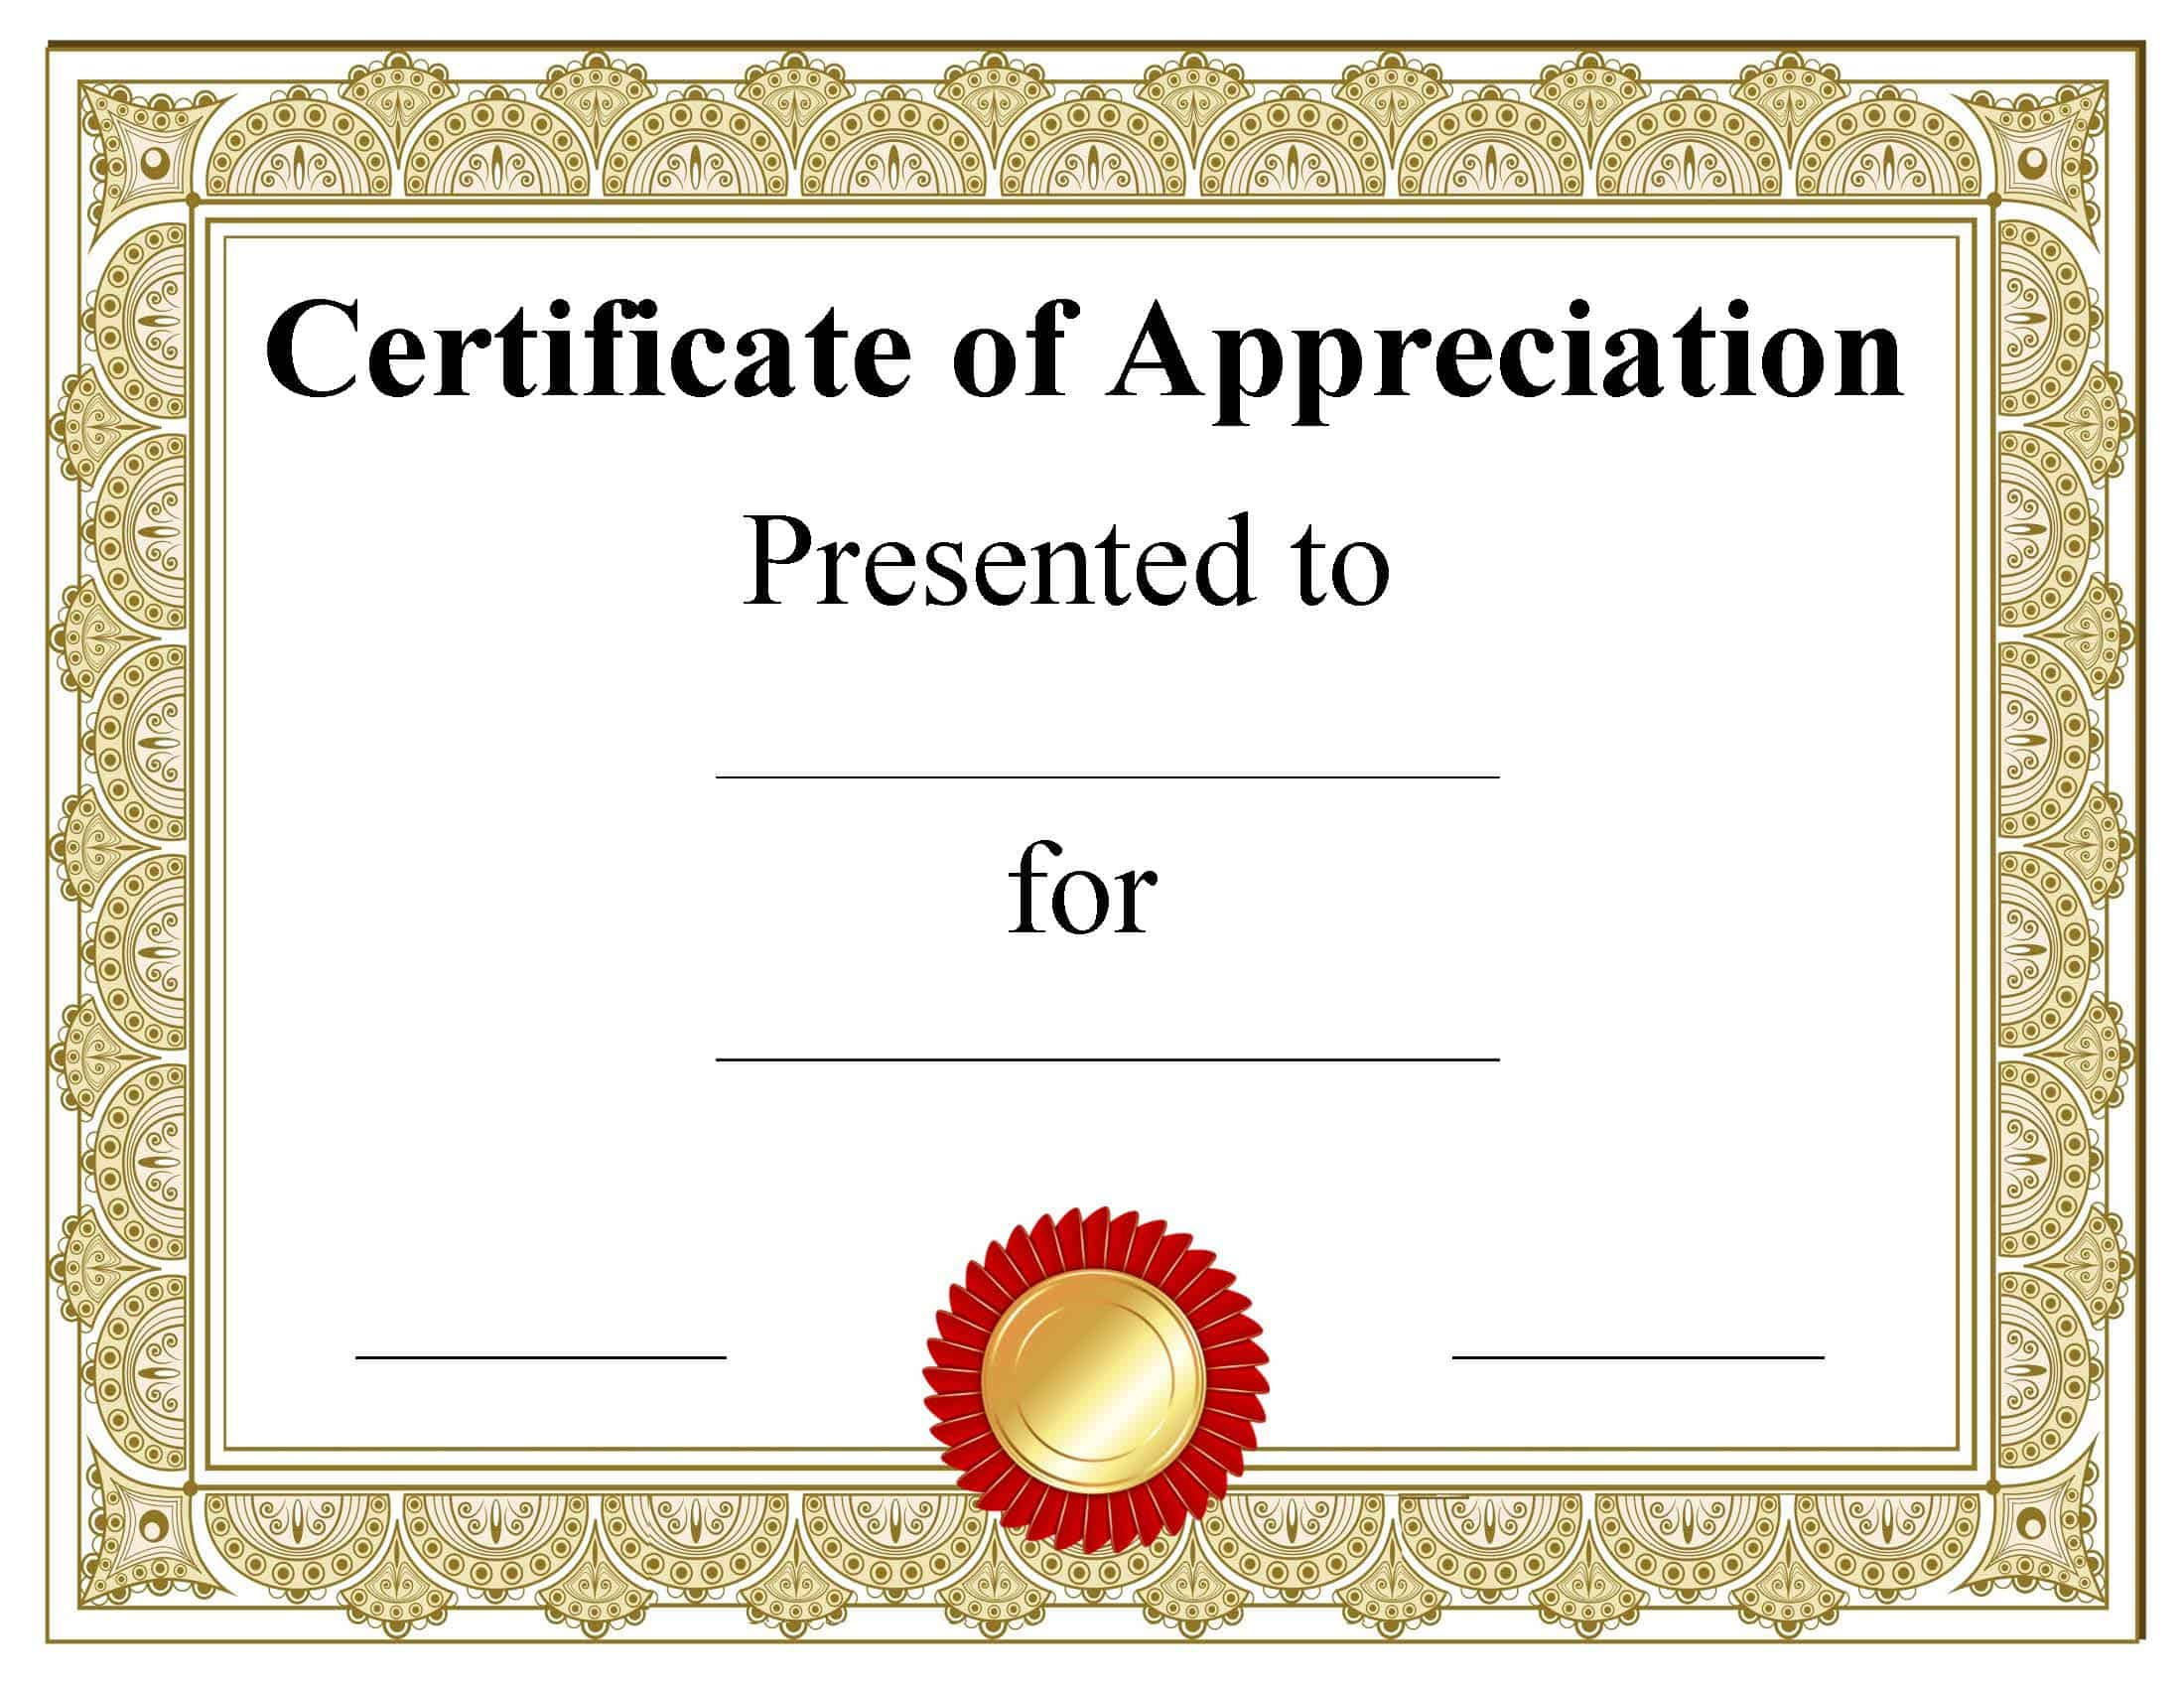 FREE Blank Certificate Templates  No Watermark Within Superlative Certificate Template